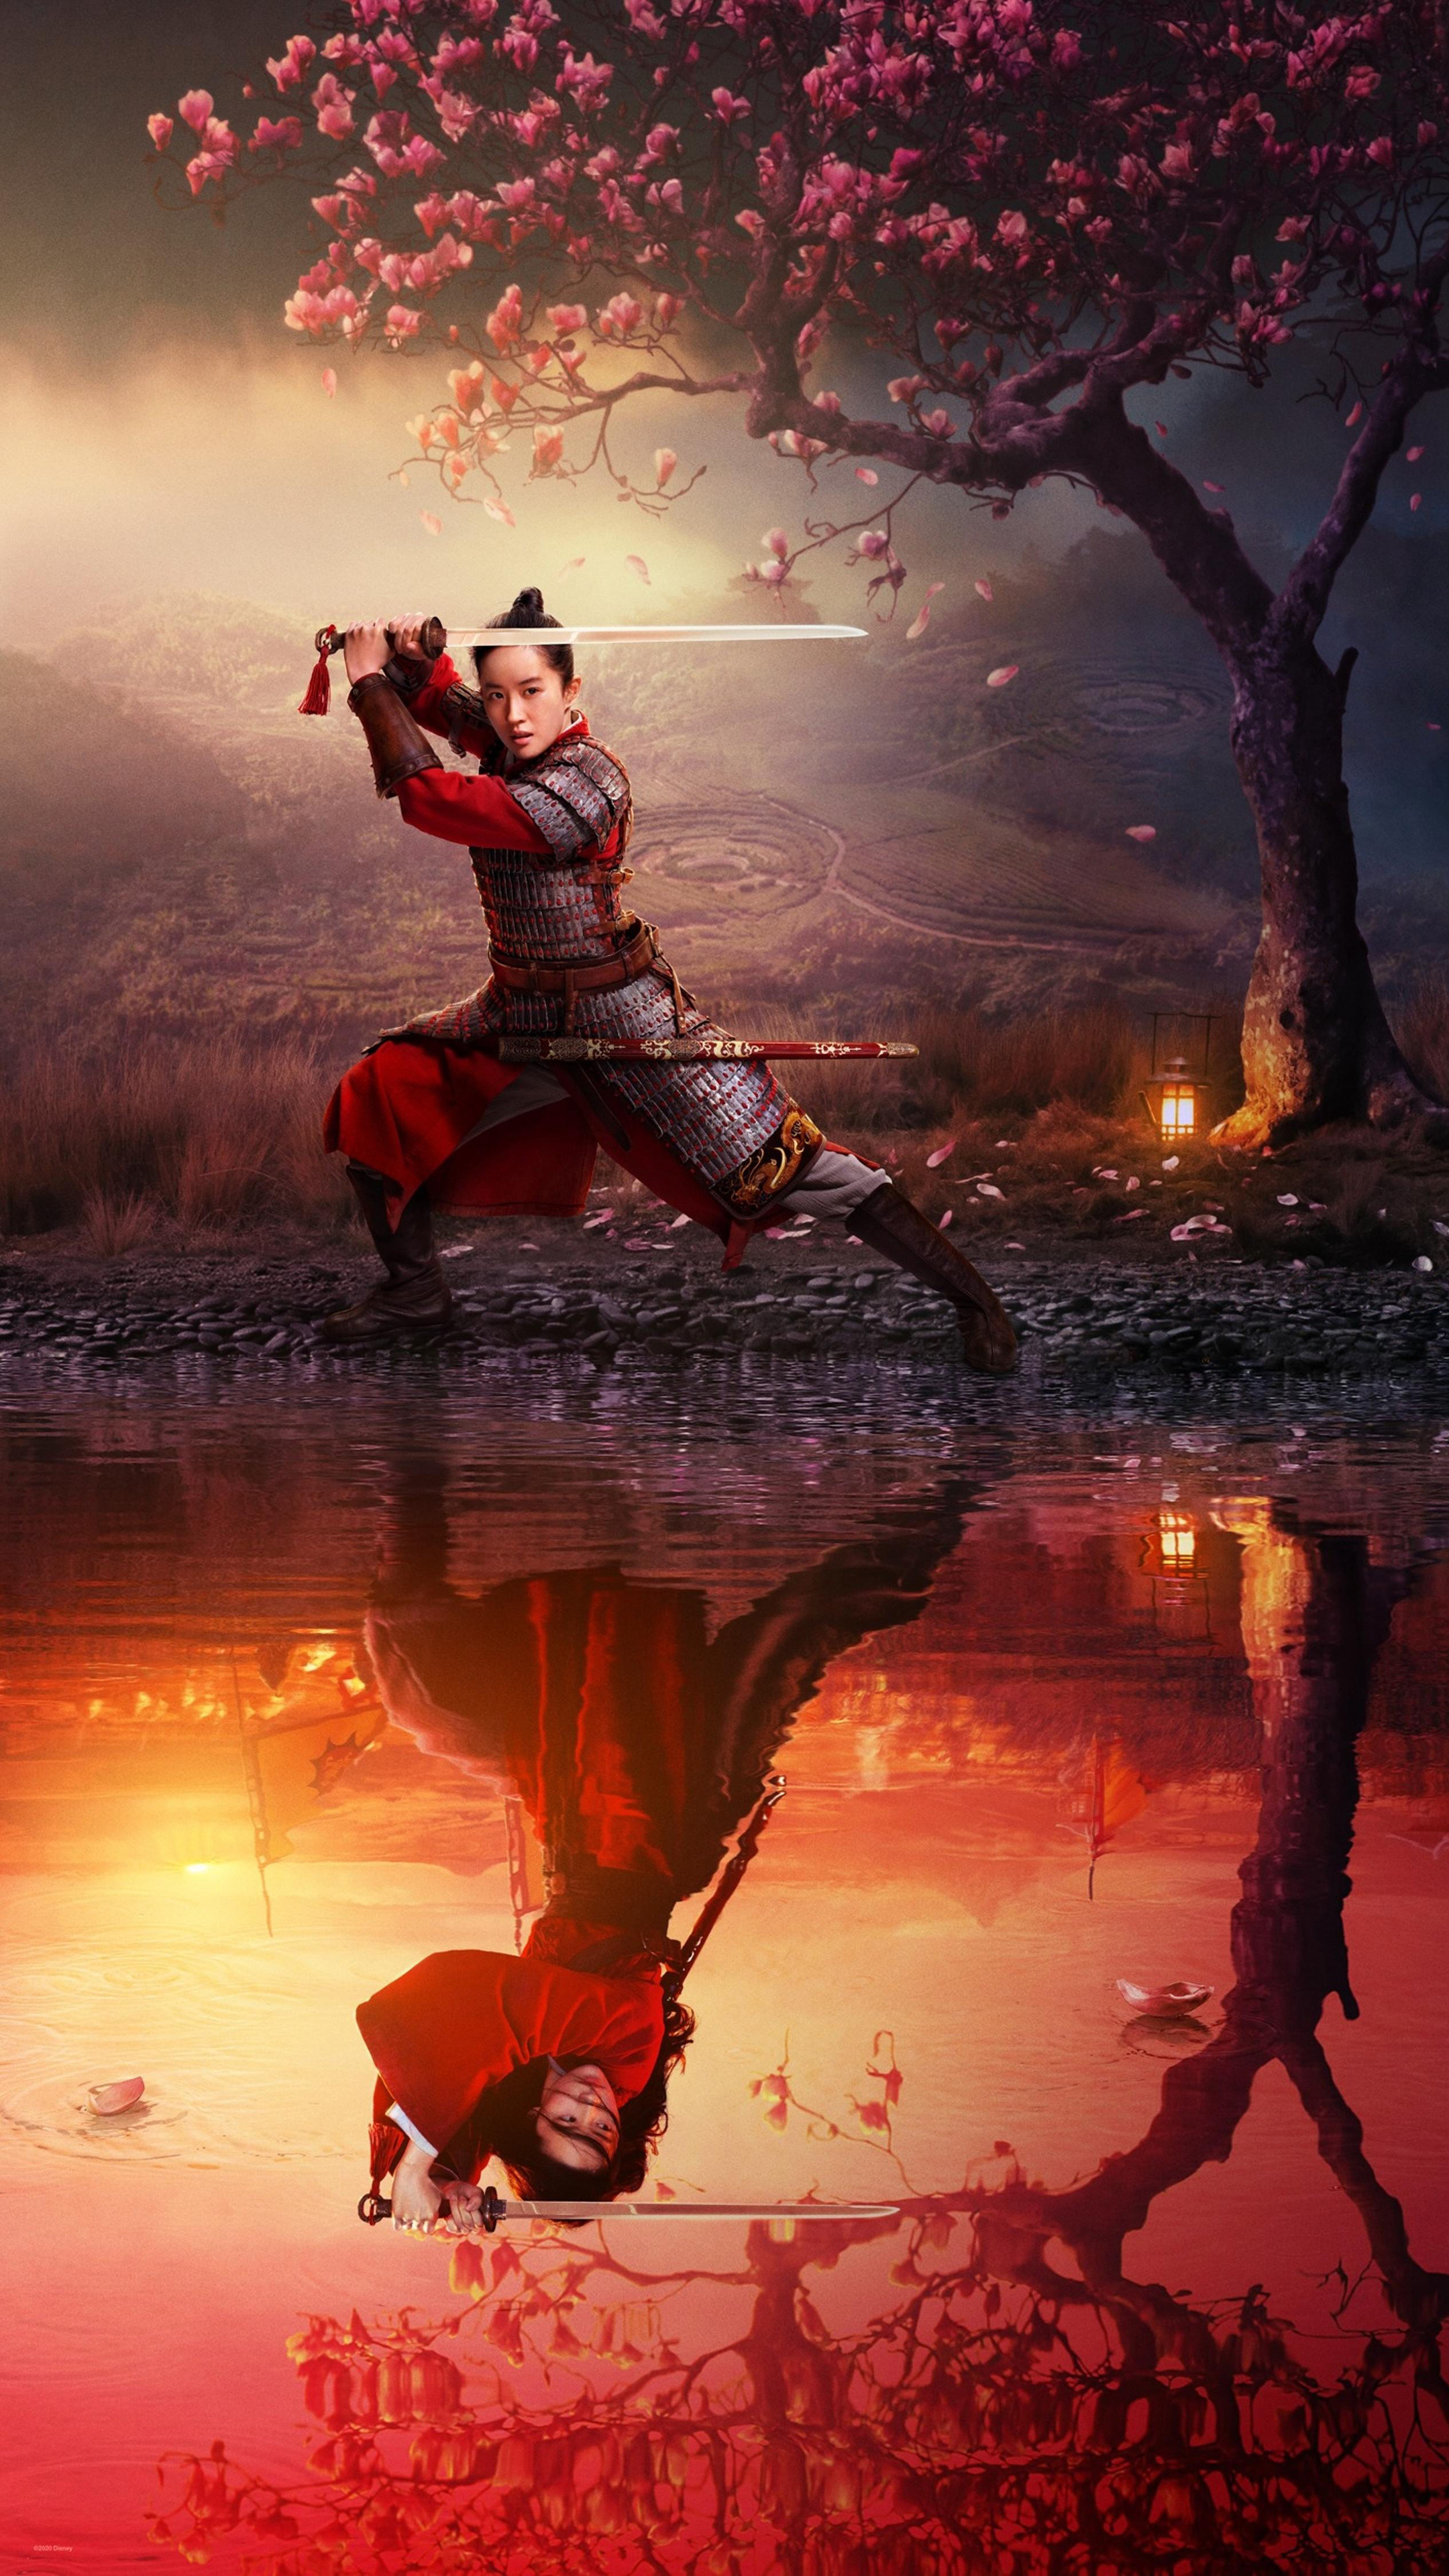 Mulan (Movie): Director Niki Caro's live-action take on the classic story of a young Chinese woman. 2160x3840 4K Wallpaper.